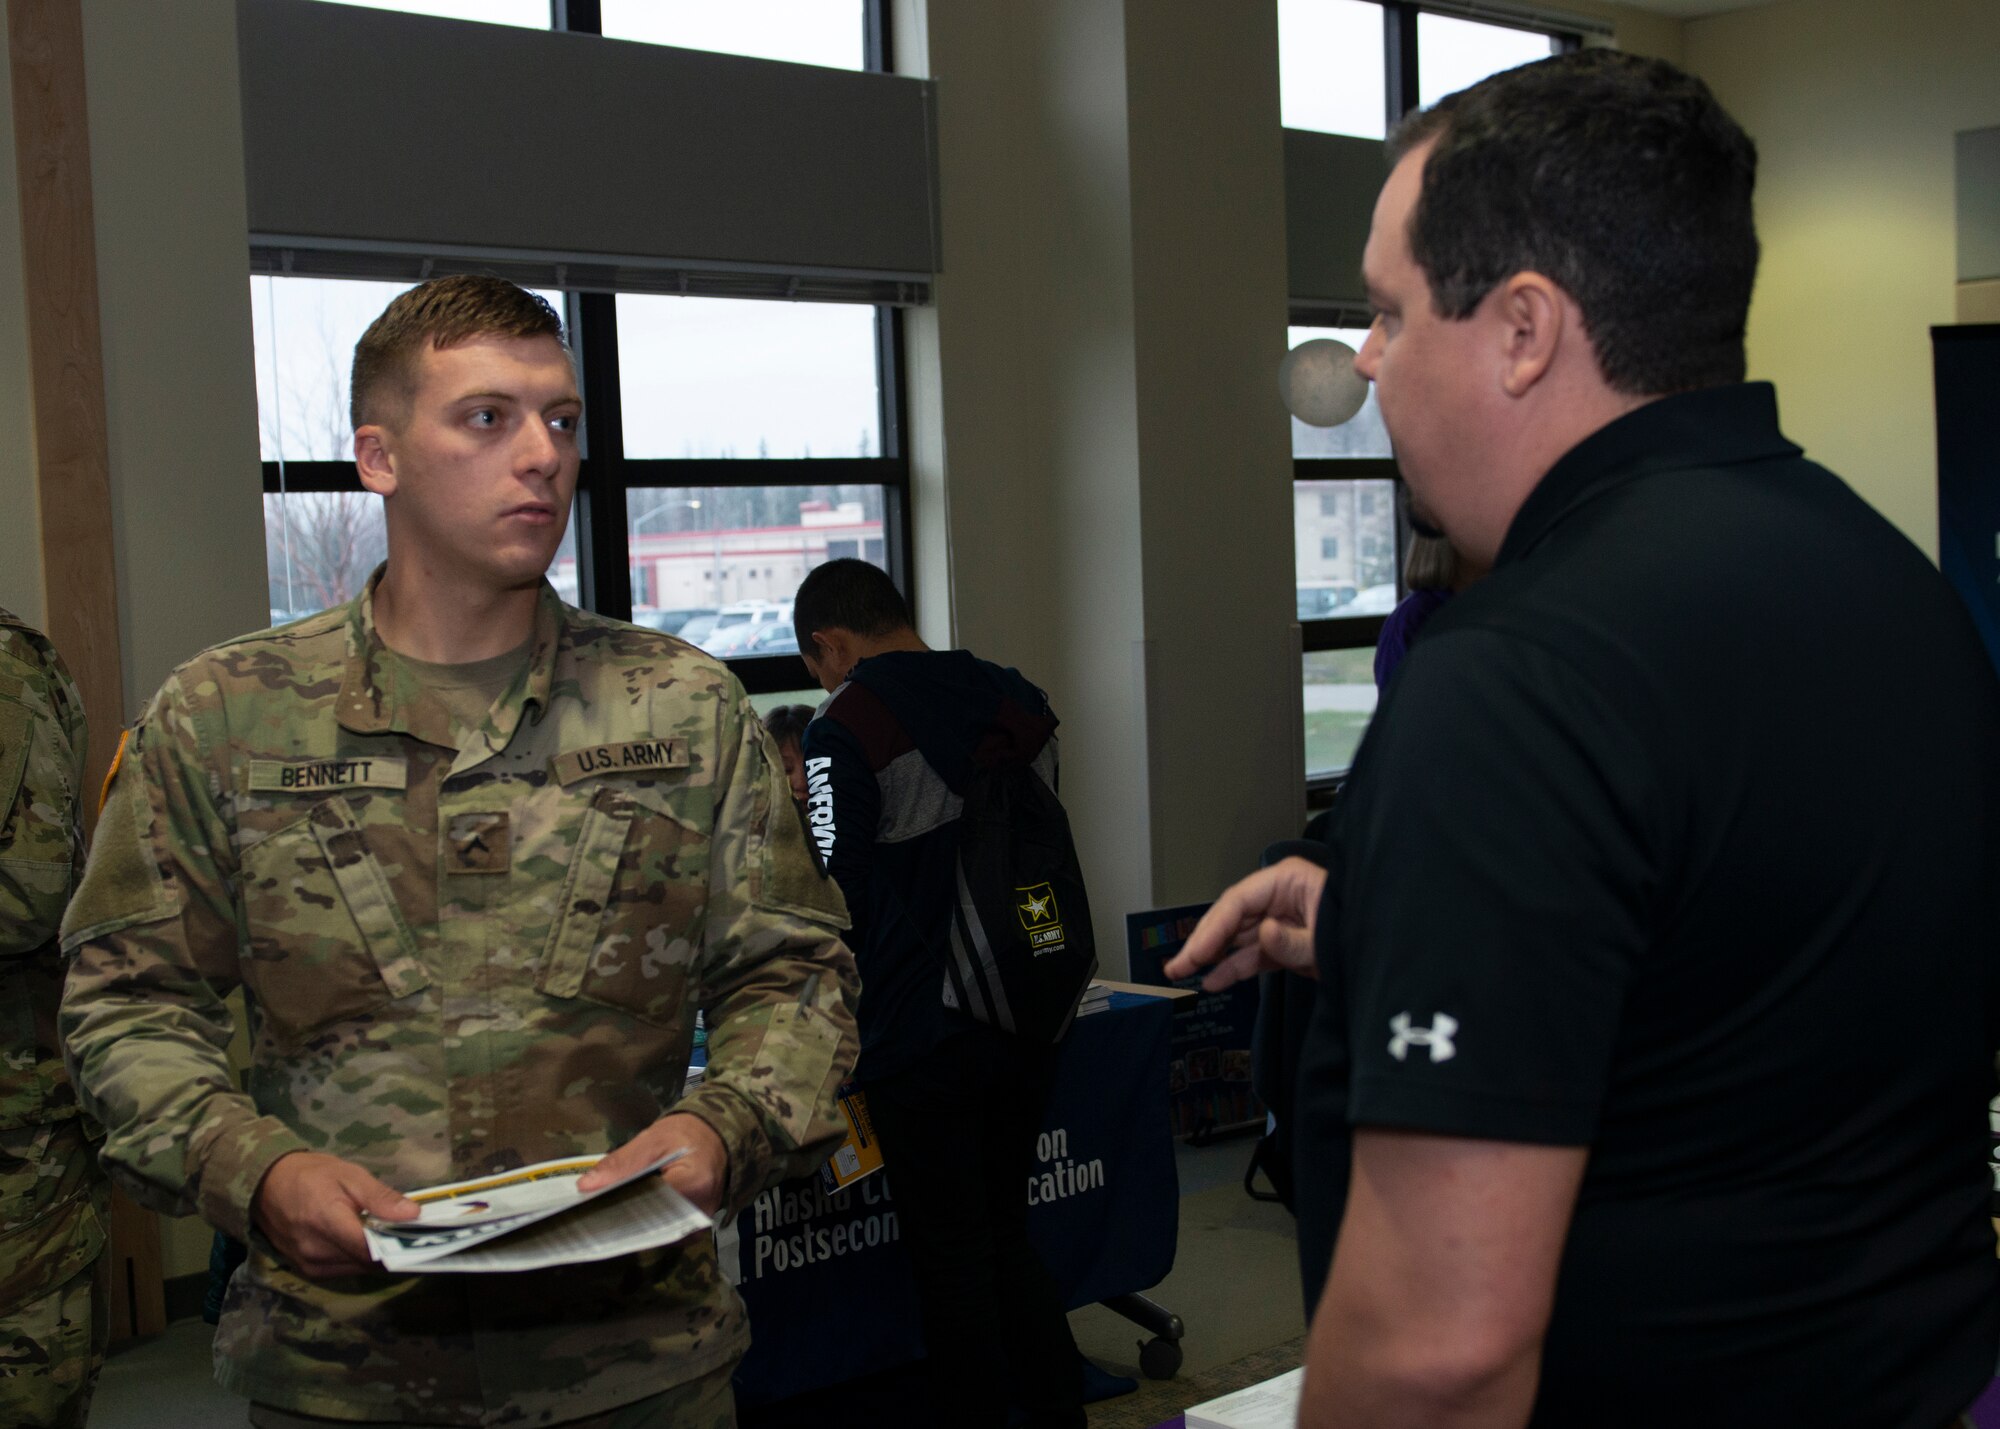 U.S. Army Pvt. Nicholas Bennett, an infantryman assigned to Comanche Company, 1st Battalion, 501st Parachute Infantry Regiment, 4th Infantry Brigade Combat Team (Airborne), 25th Infantry Division, U.S. Army Alaska, gathers information about colleges during the Fall Education Fair at Joint Base Elmendorf-Richardson, Alaska, Oct. 31, 2019. The JBER Army Education Center hosted the event, which allowed more than 20 vendors to showcase a variety of educational opportunities.